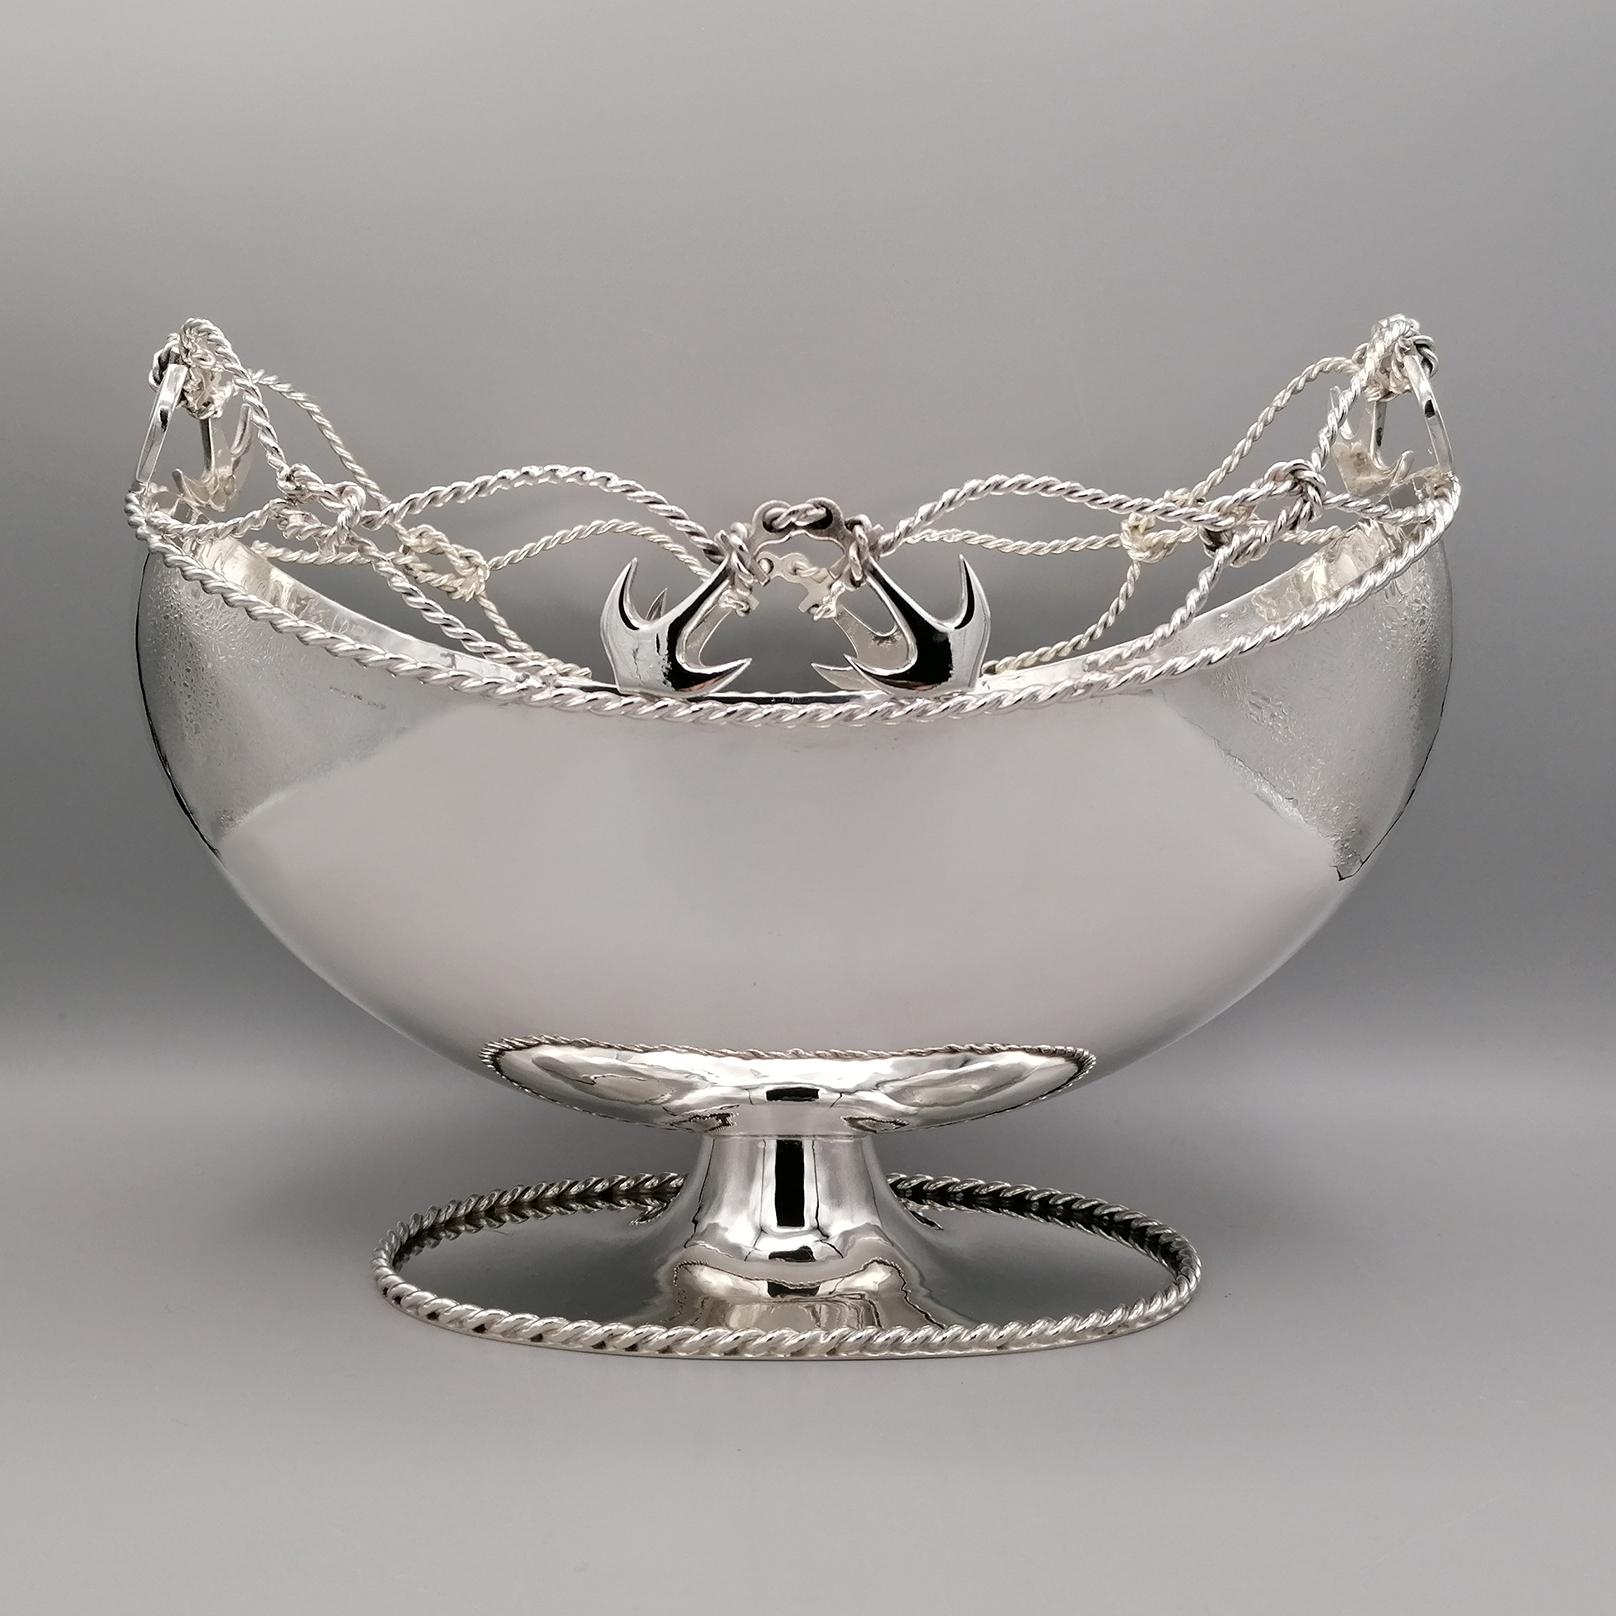 Solid silver centerpiece. 
The body is hammer-drawn oval and handmade from the silver sheet. 
The upper part of the body is decorated with silver wire twisted as a rope that forms drawings of nautical knots.
To the wire which make up the upper